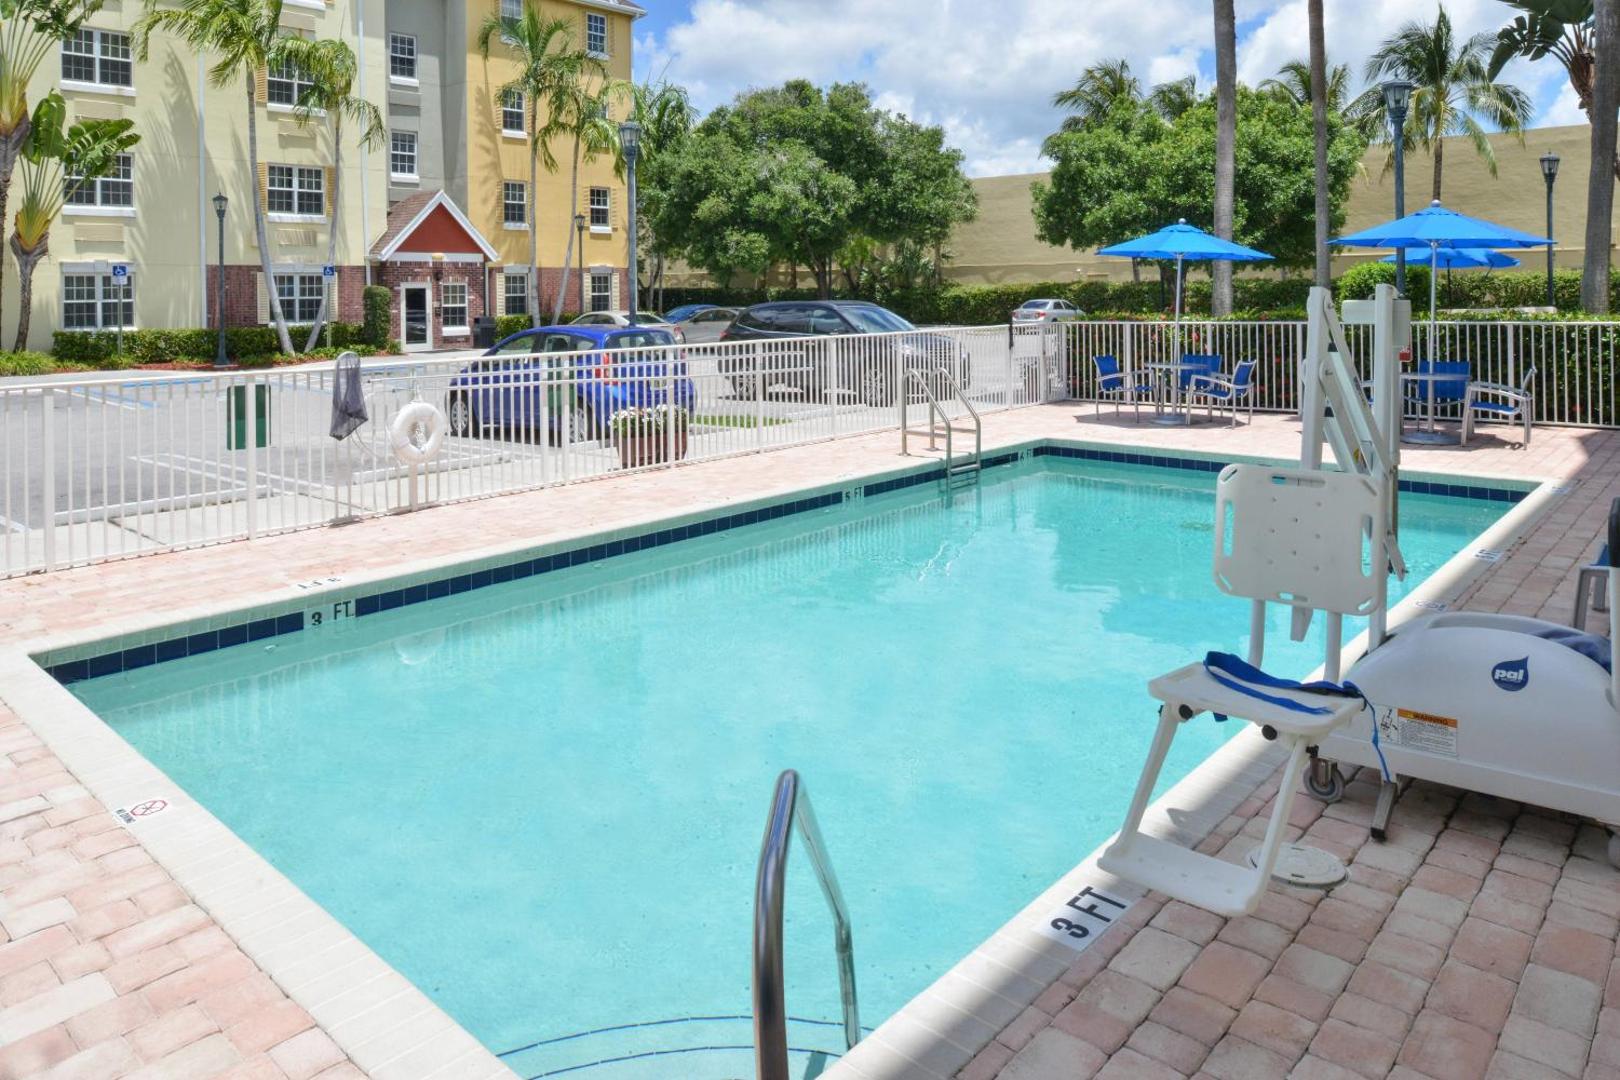 TownePlace Suites Miami Airport West/Doral Area